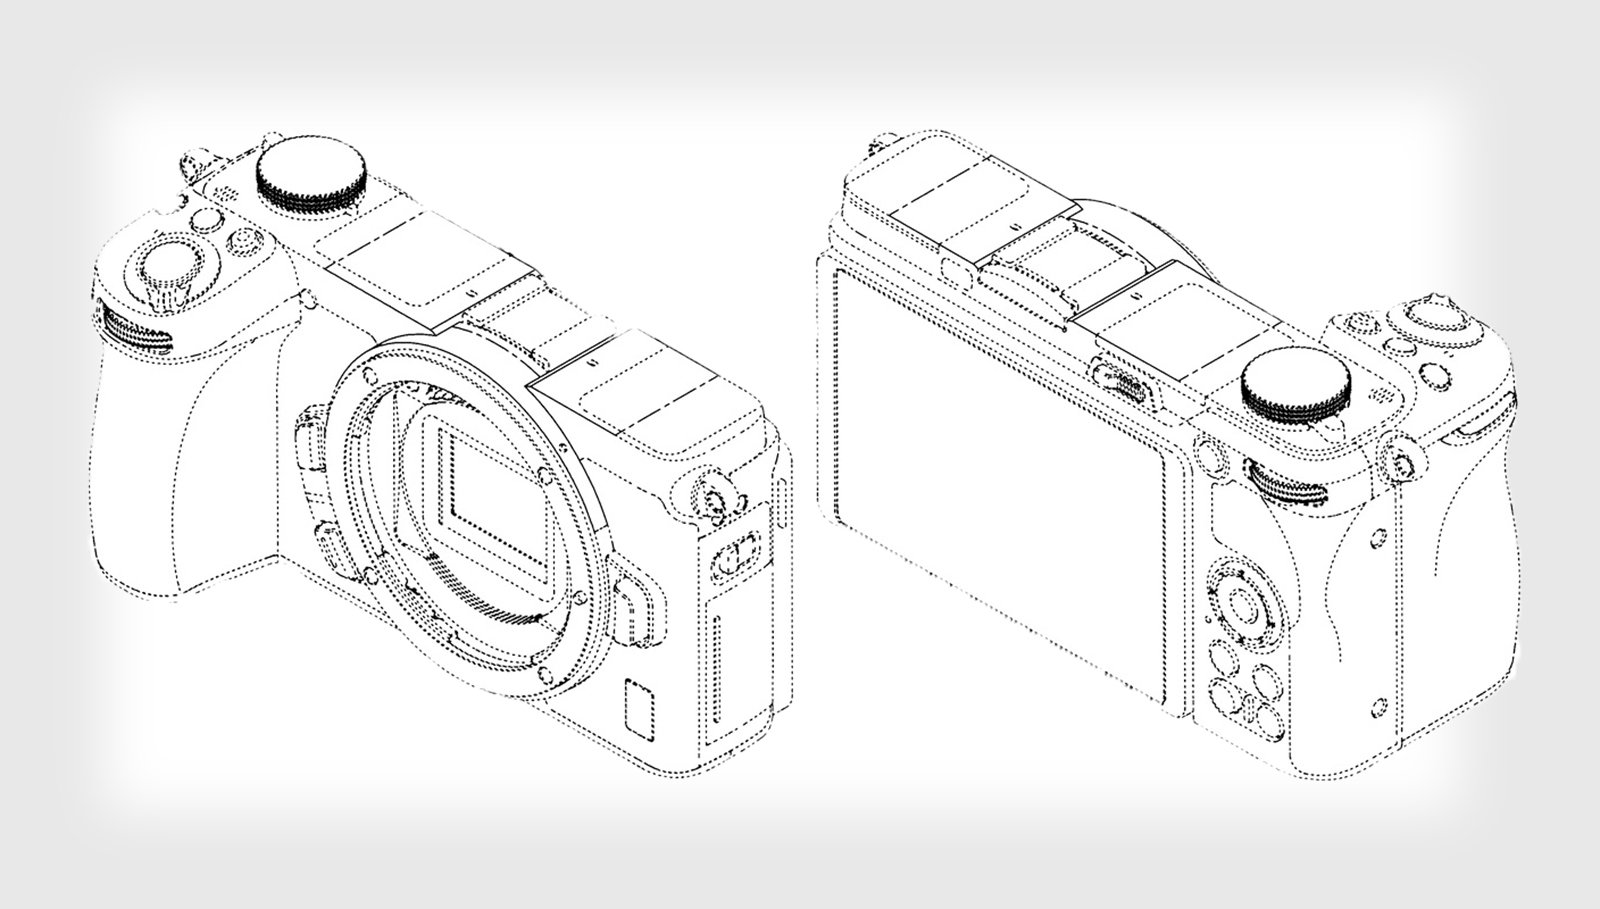 Patent Images Show Rumored Nikon Z-Mount APS-C Camera Without an EVF